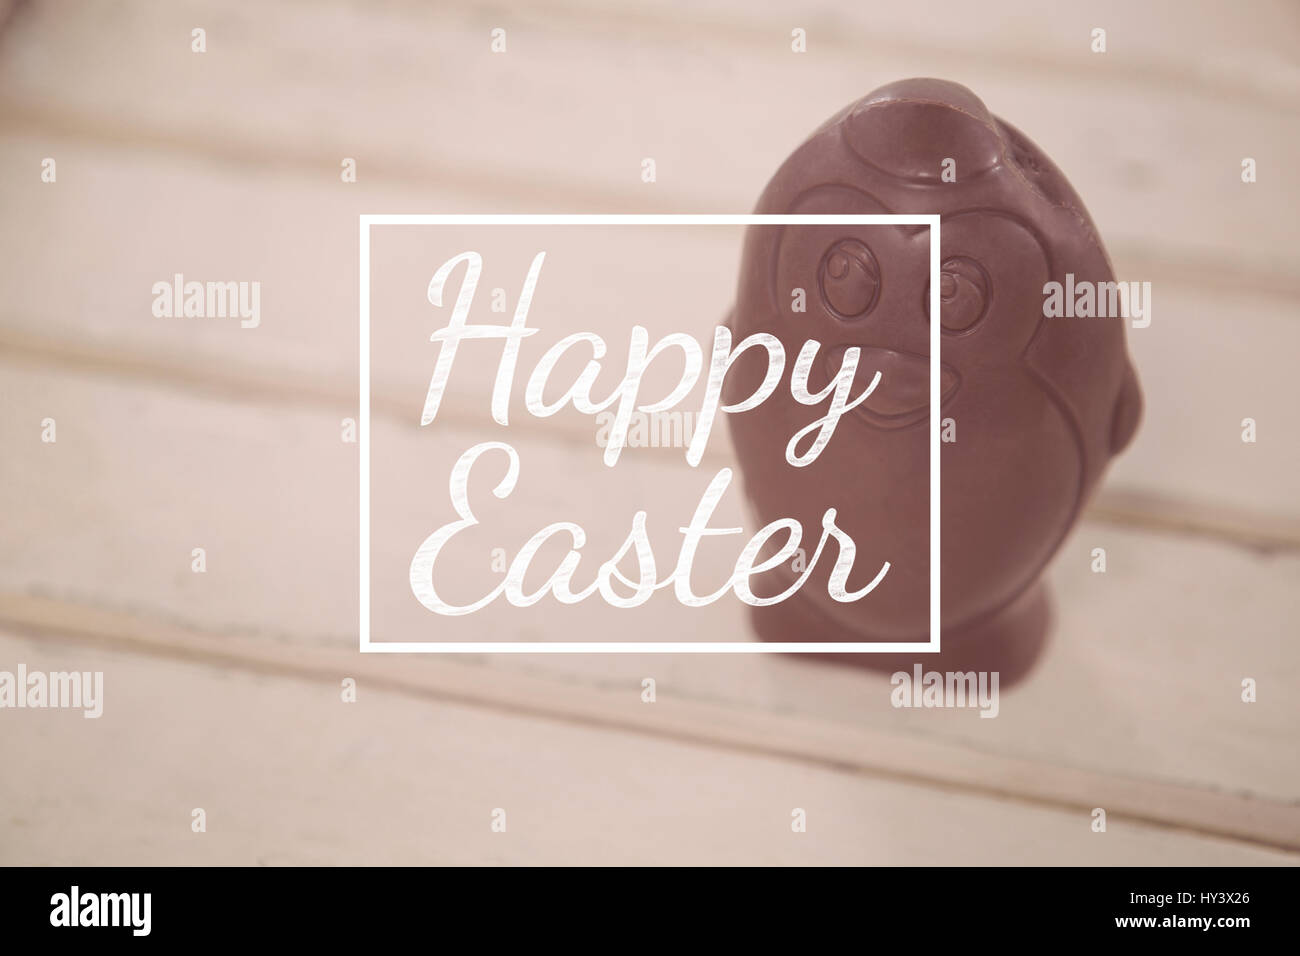 happy easter against chocolate easter egg on wooden plank Stock Photo